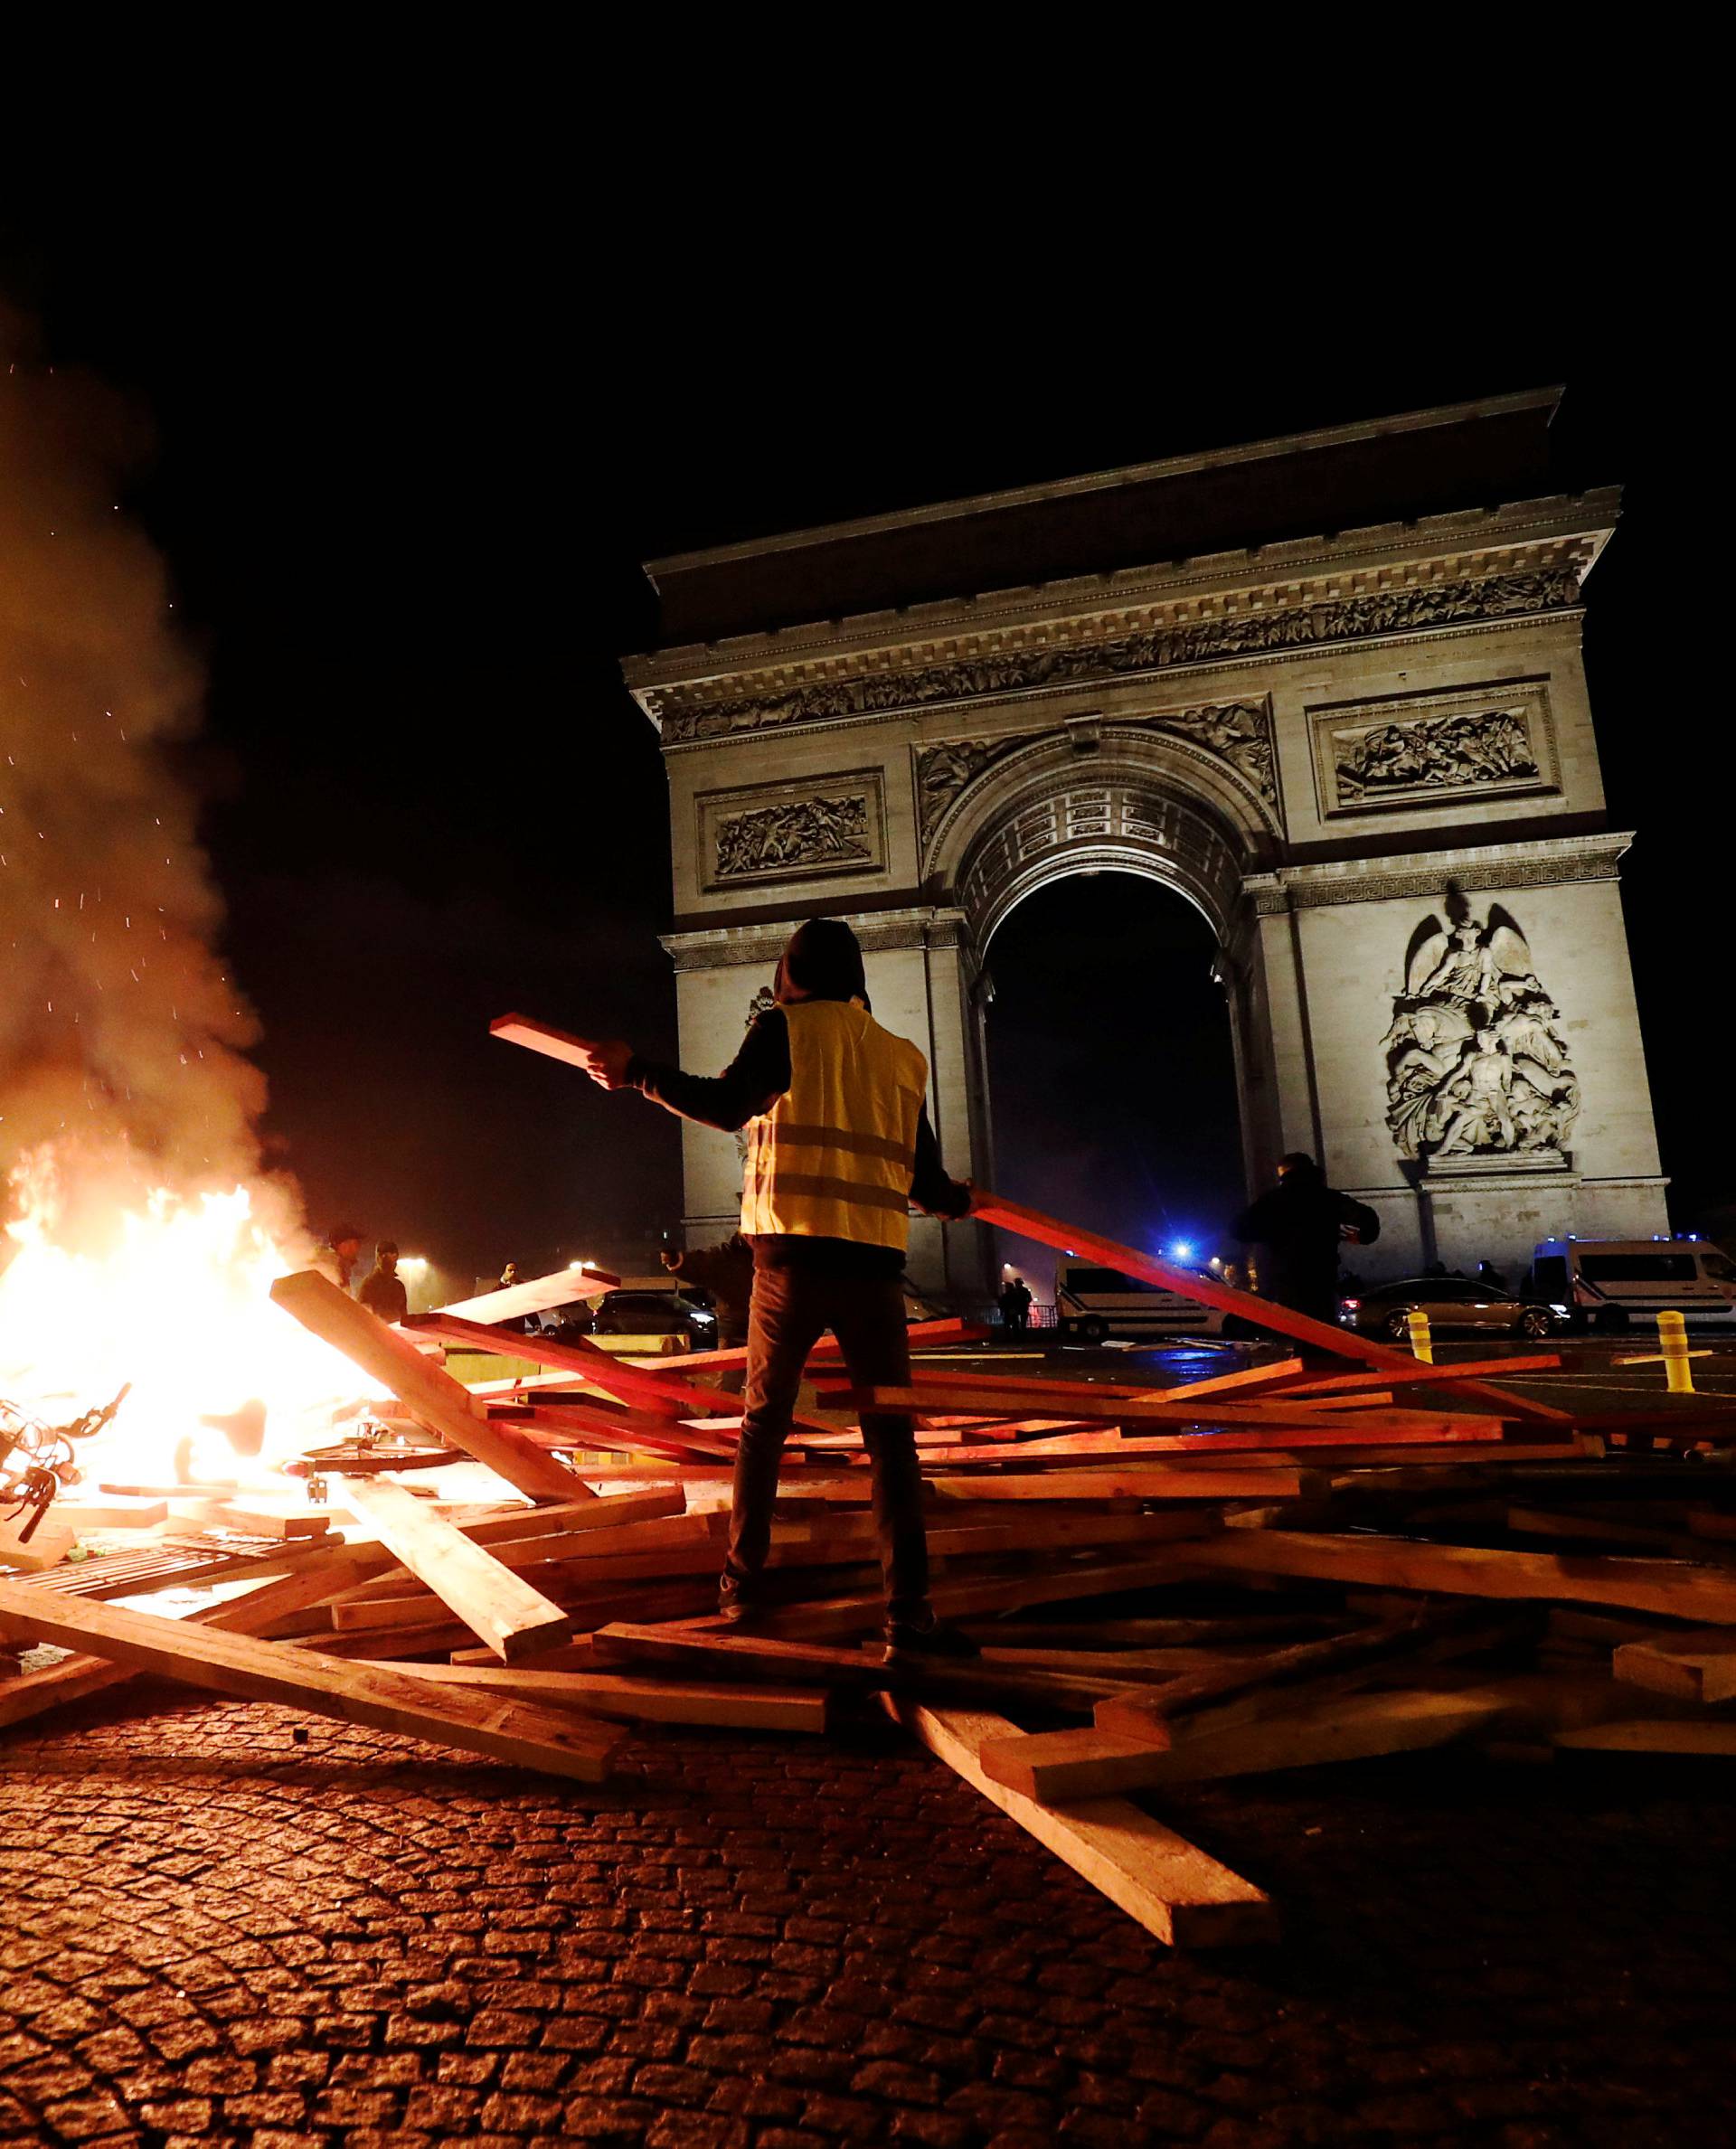 Protesters set fire during a "Yellow vest"Â protestsÂ against higher fuel prices, on the Champs-Elysees in Paris